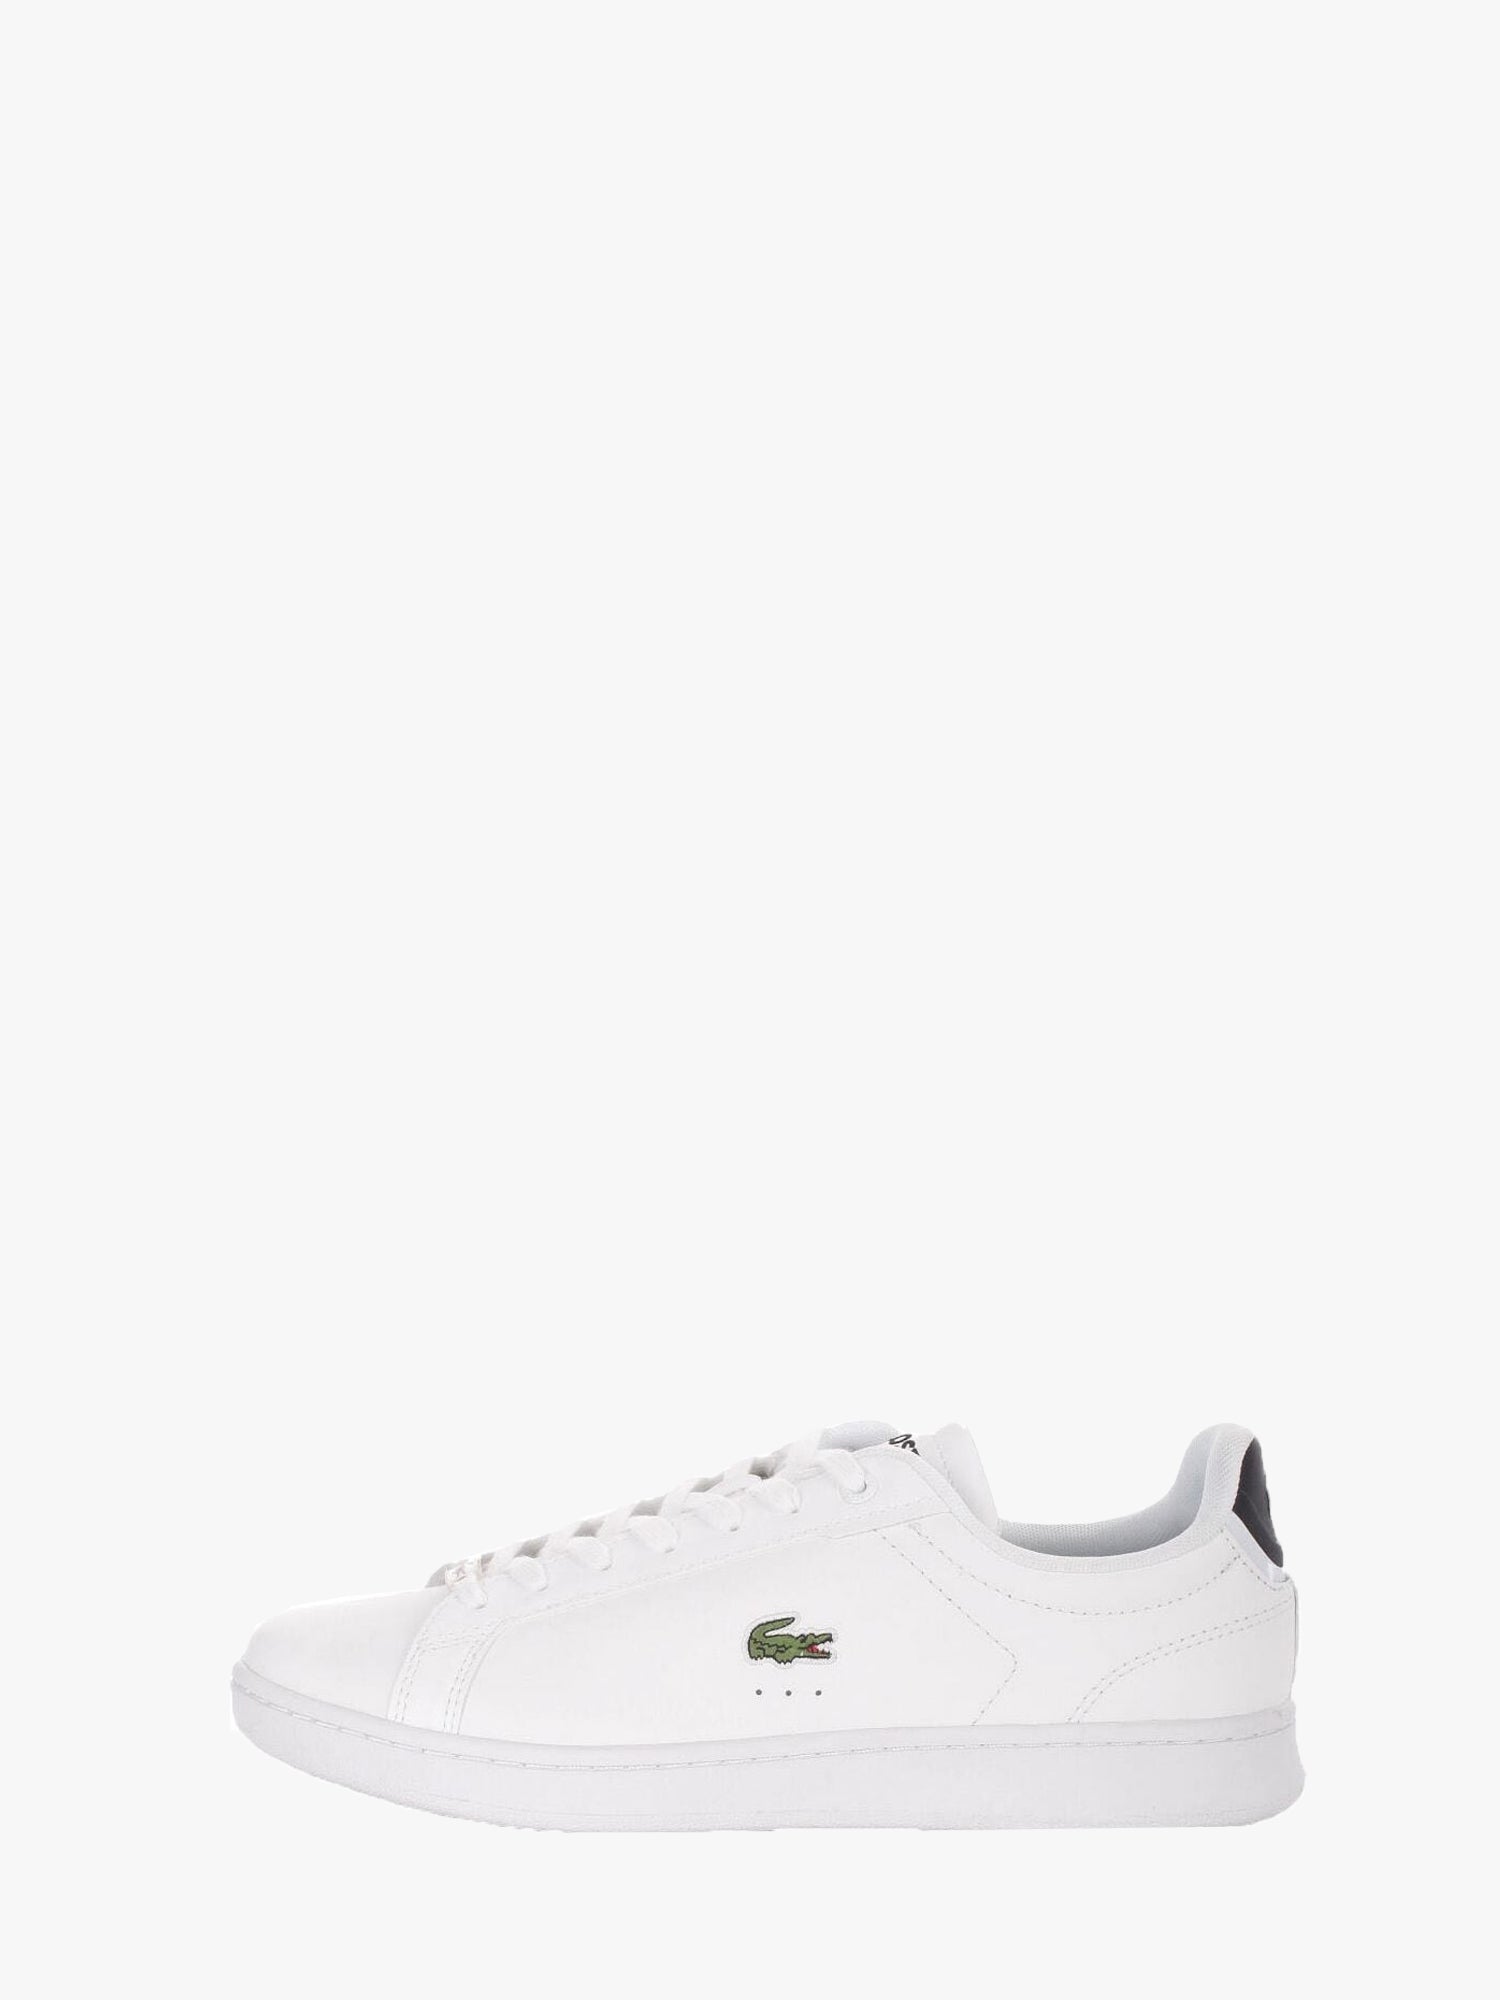 LACOSTE SNEAKERS CARNABY PRO BIANCO - NERO